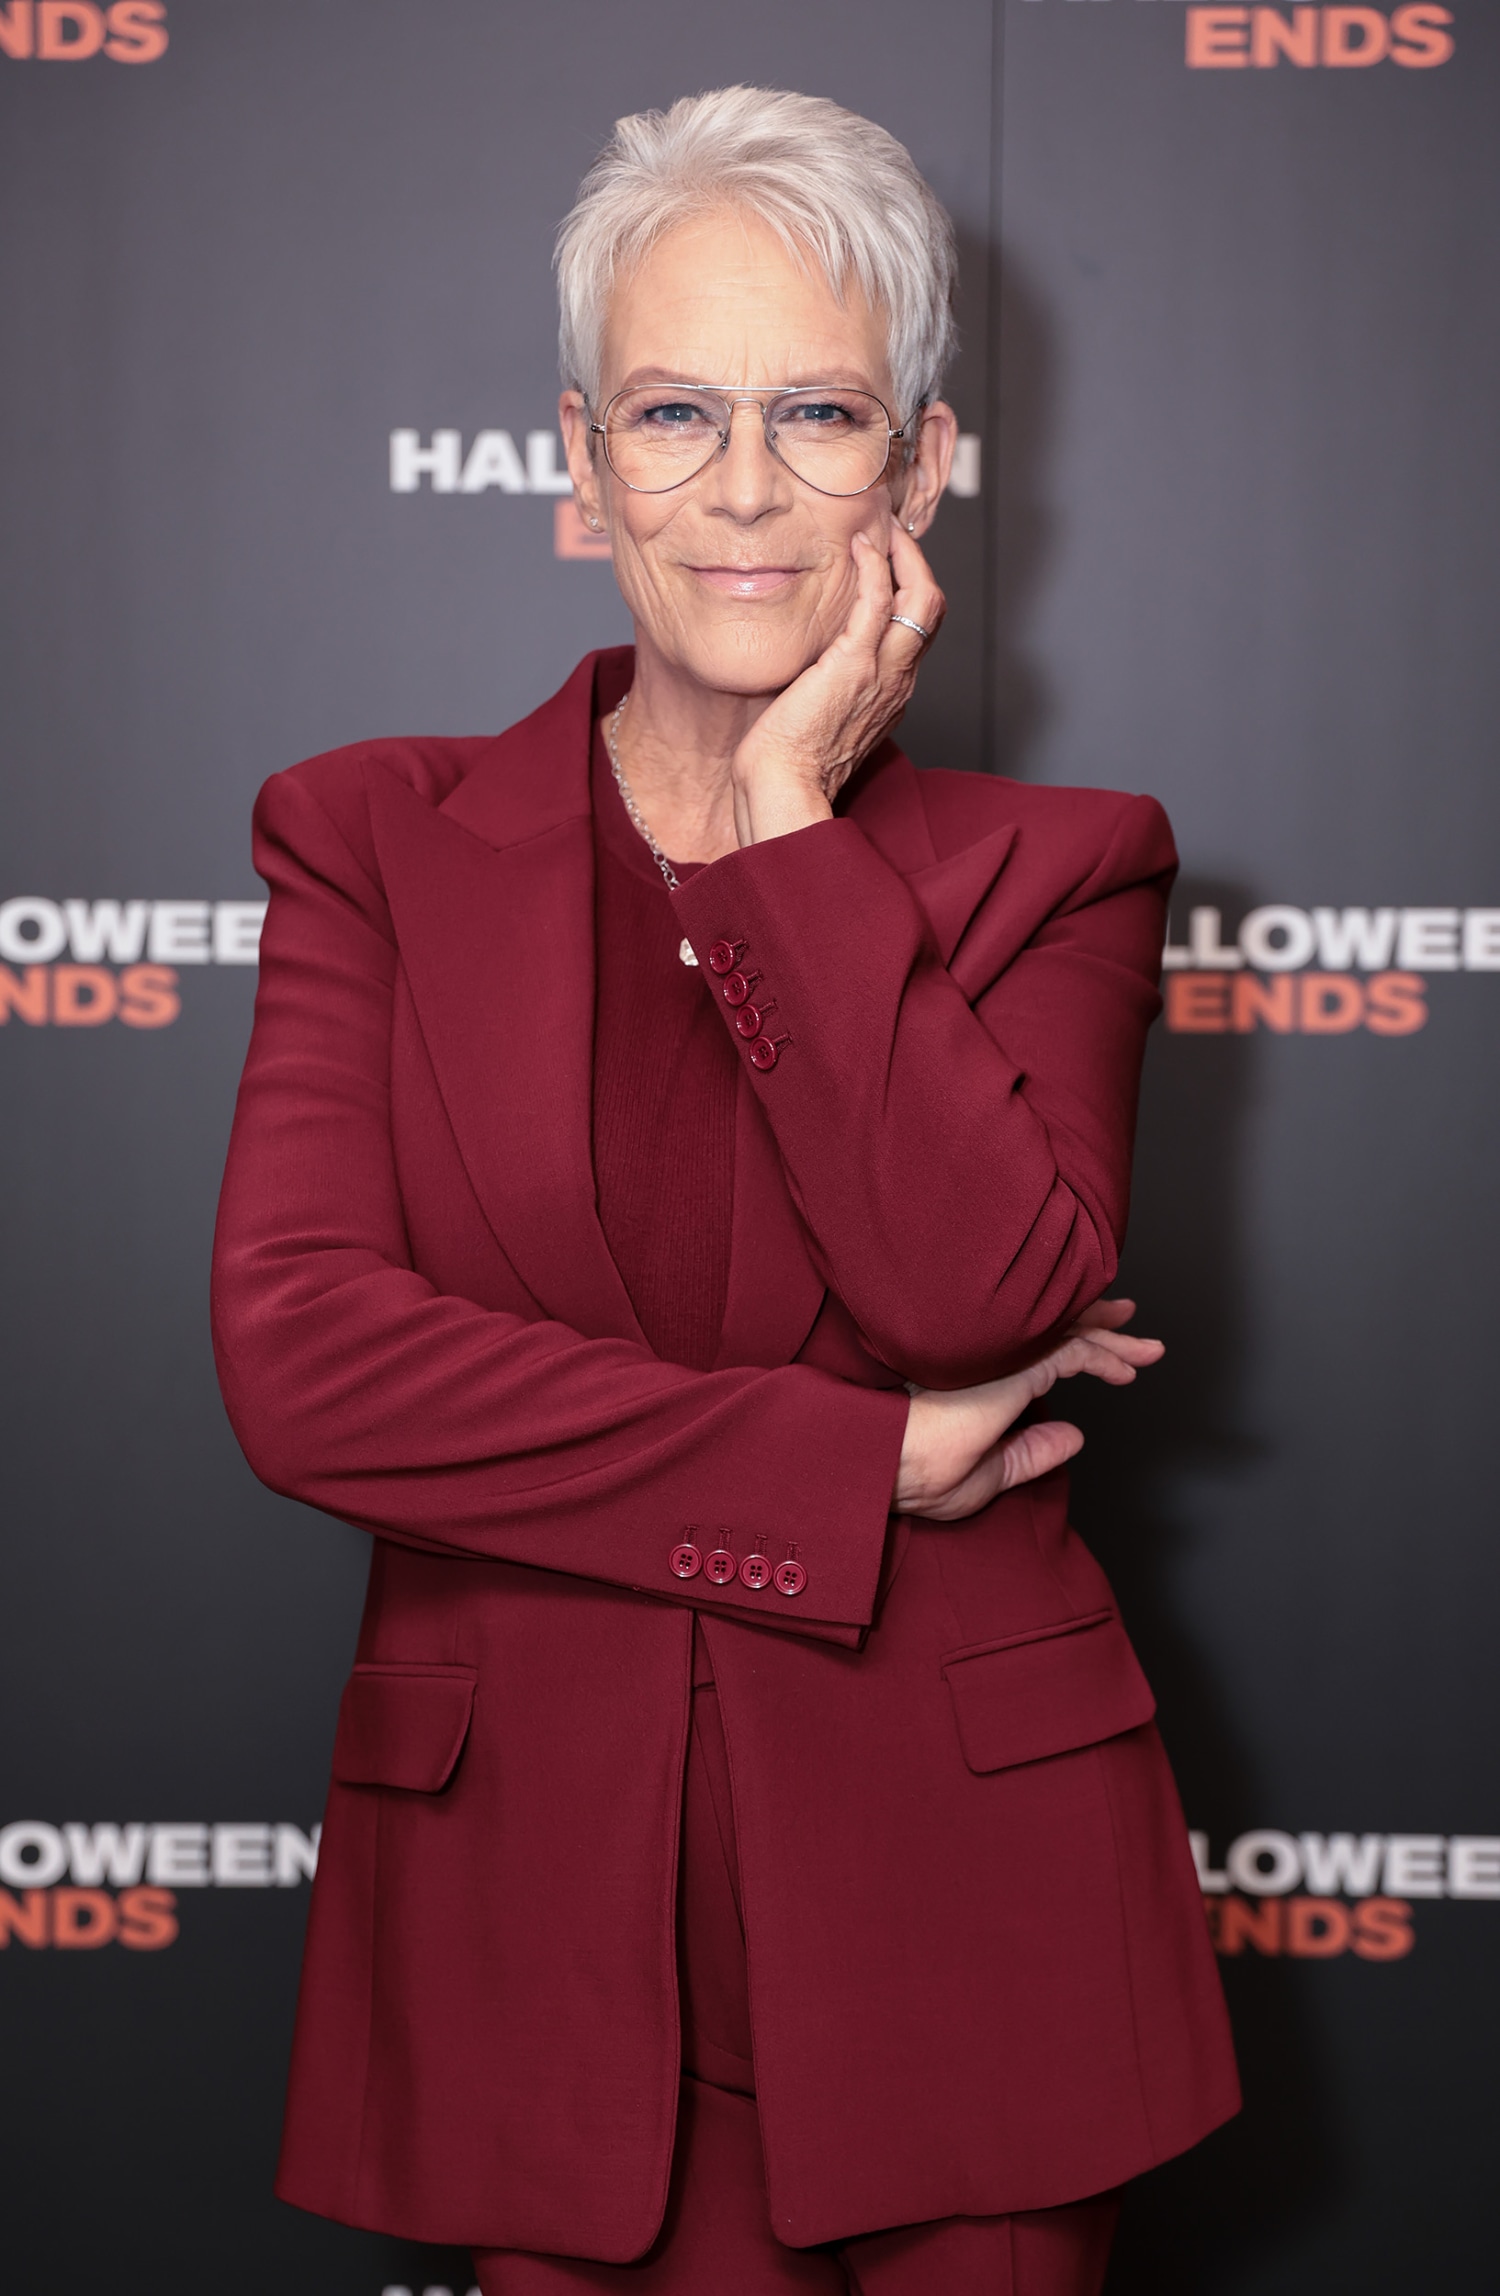 Jamie Lee Curtis Gives Advice On Aging: 'Don't Mess With Your Face'